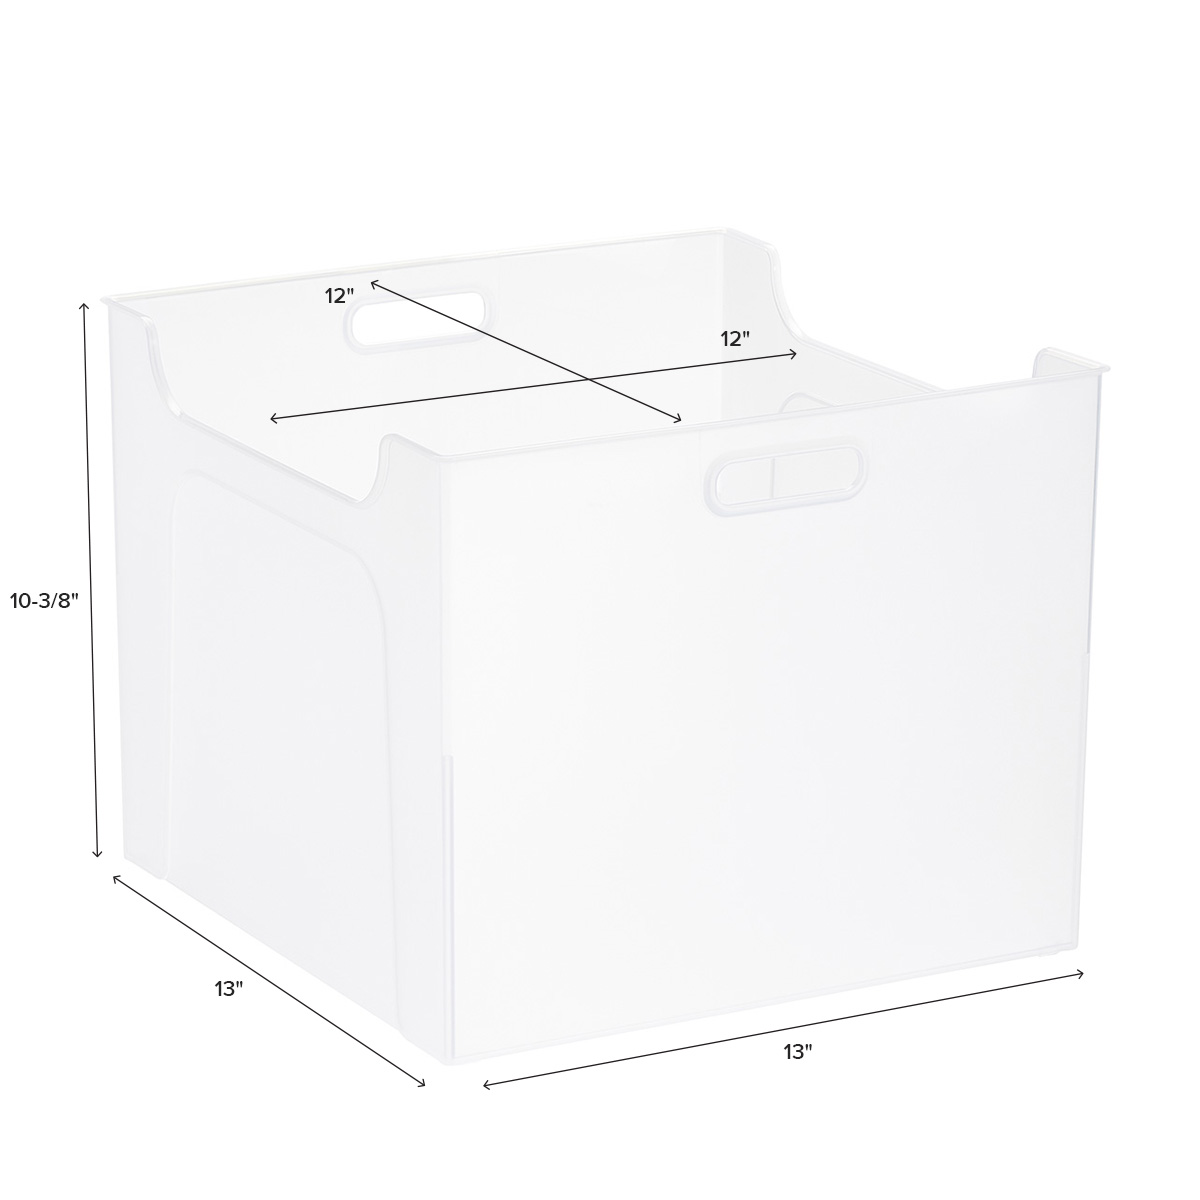 https://www.containerstore.com/catalogimages/445753/10080907-Shimo-tall-bin-translucent-.jpg